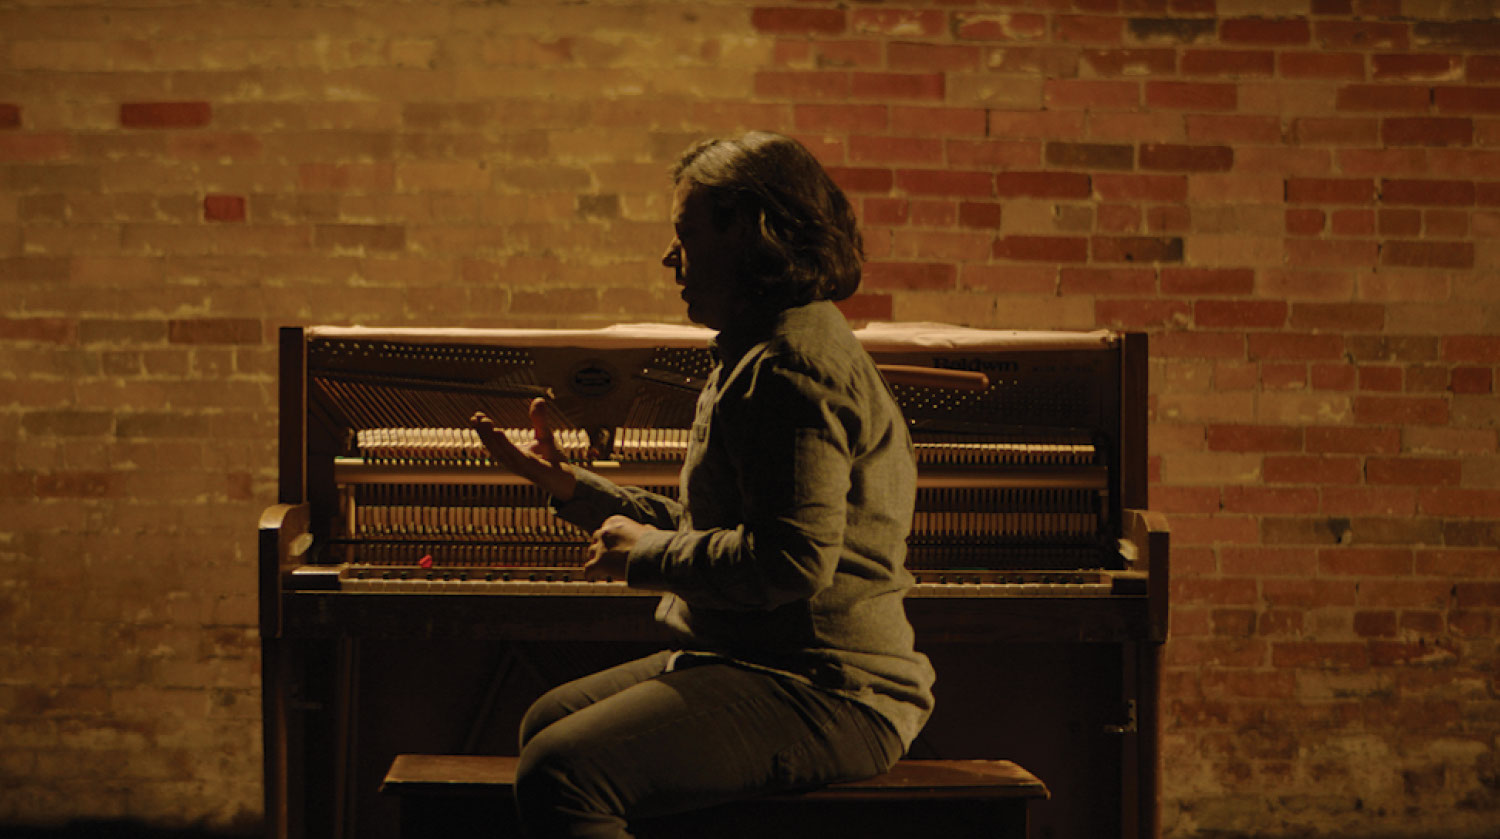 Actor James Smith sits on a bench in neutral-coloured clothing before an antique piano. The wall behind the piano features exposed red bricks. He puts his hands out in front of him to look at them. The room he is in is dimly lit and casts a shadow over his body. 